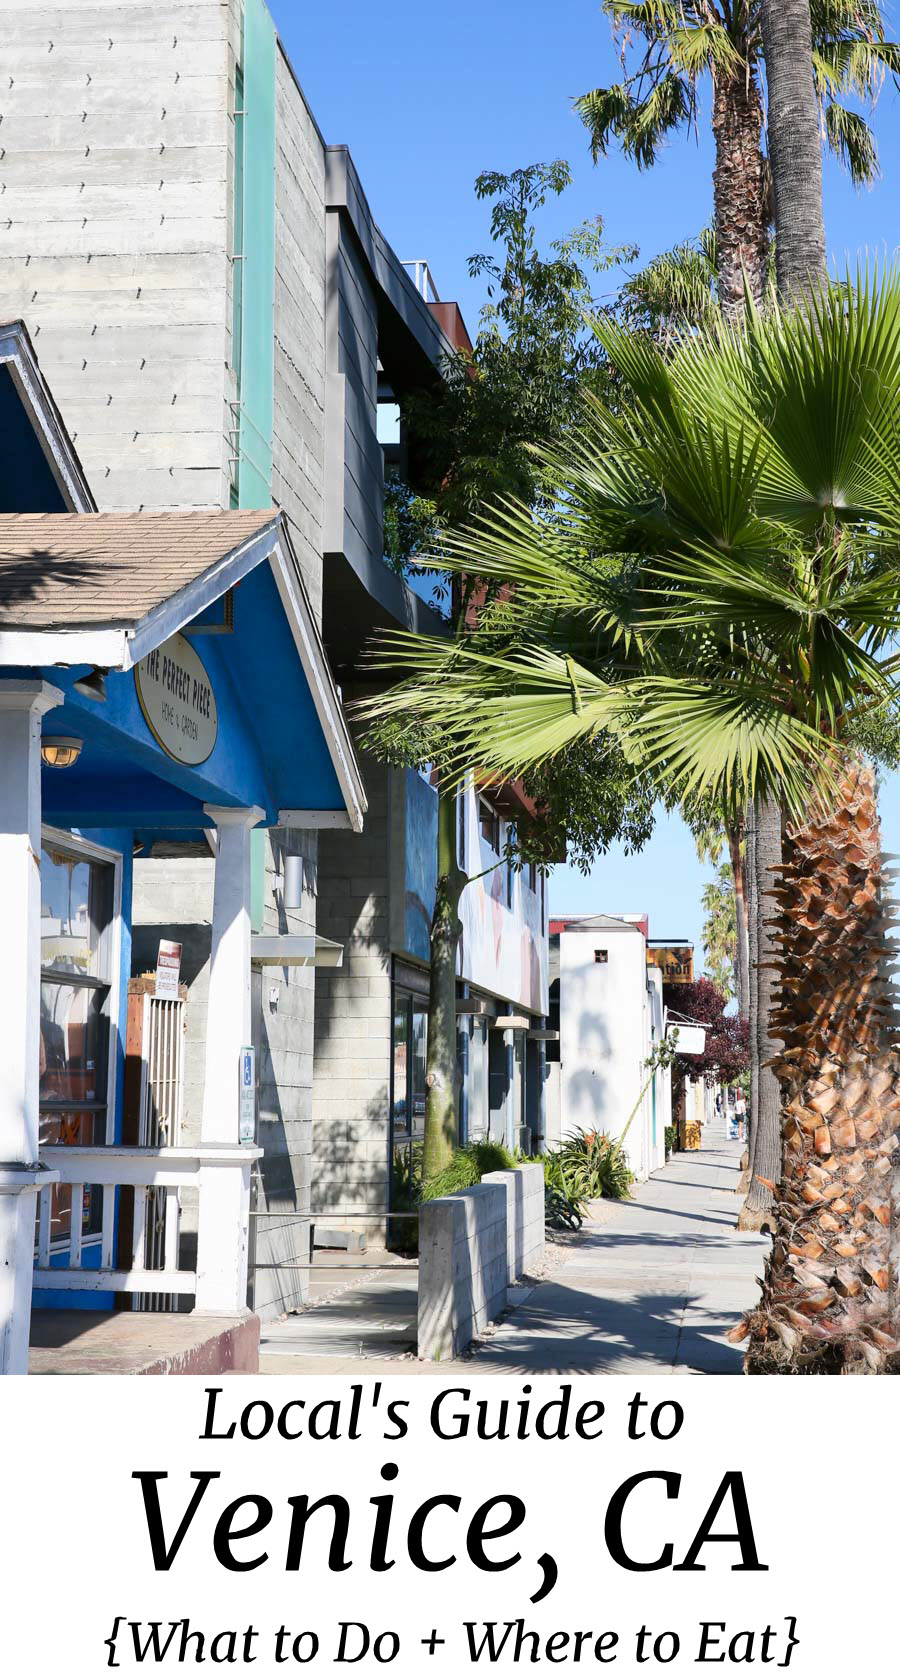 Local's Guide to Venice & Abbot Kinney. What to Do, Where to Eat in Venice. #losangeles #venice #travel #travelguide #lablogger #california #southerncalifornai #socal #lpworldtravel.